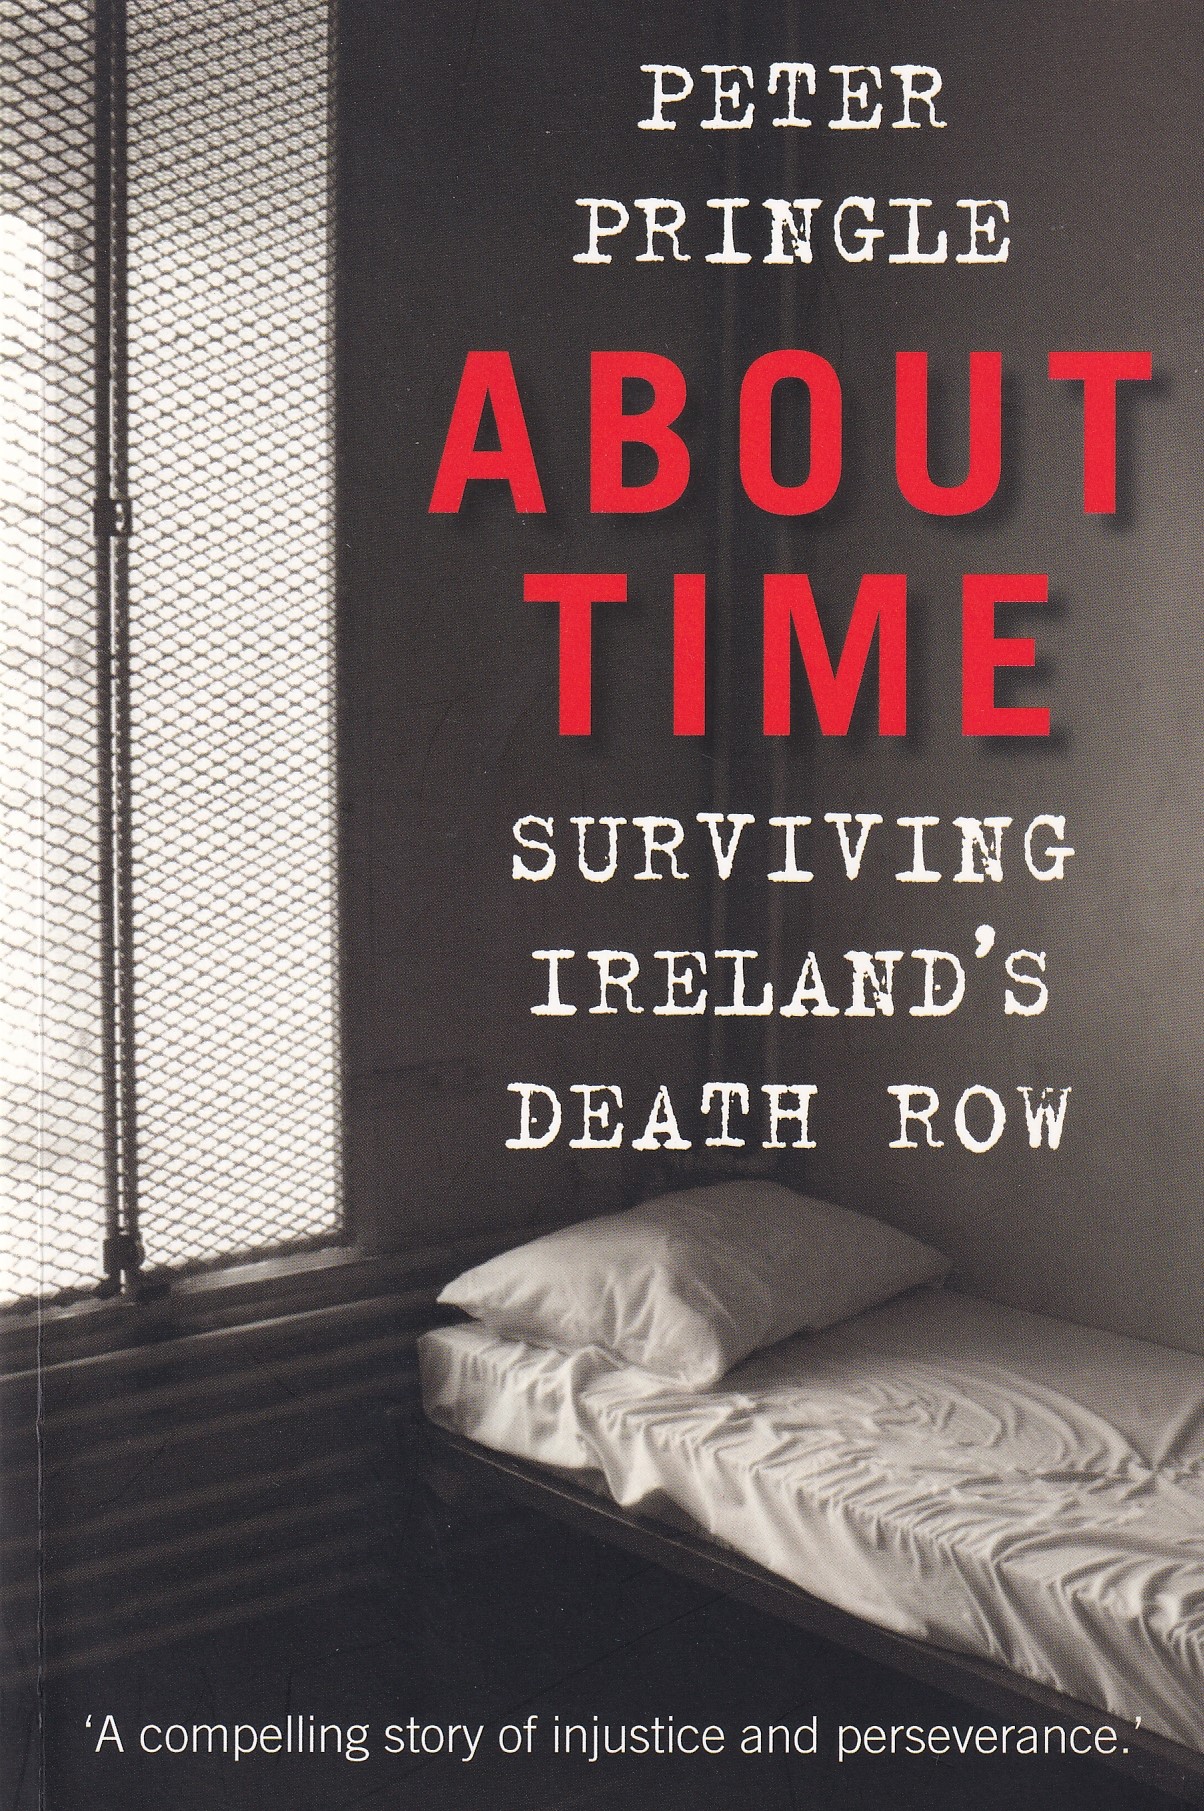 About Time: Surviving Ireland’s Death Row (Signed) by Pringle, Peter